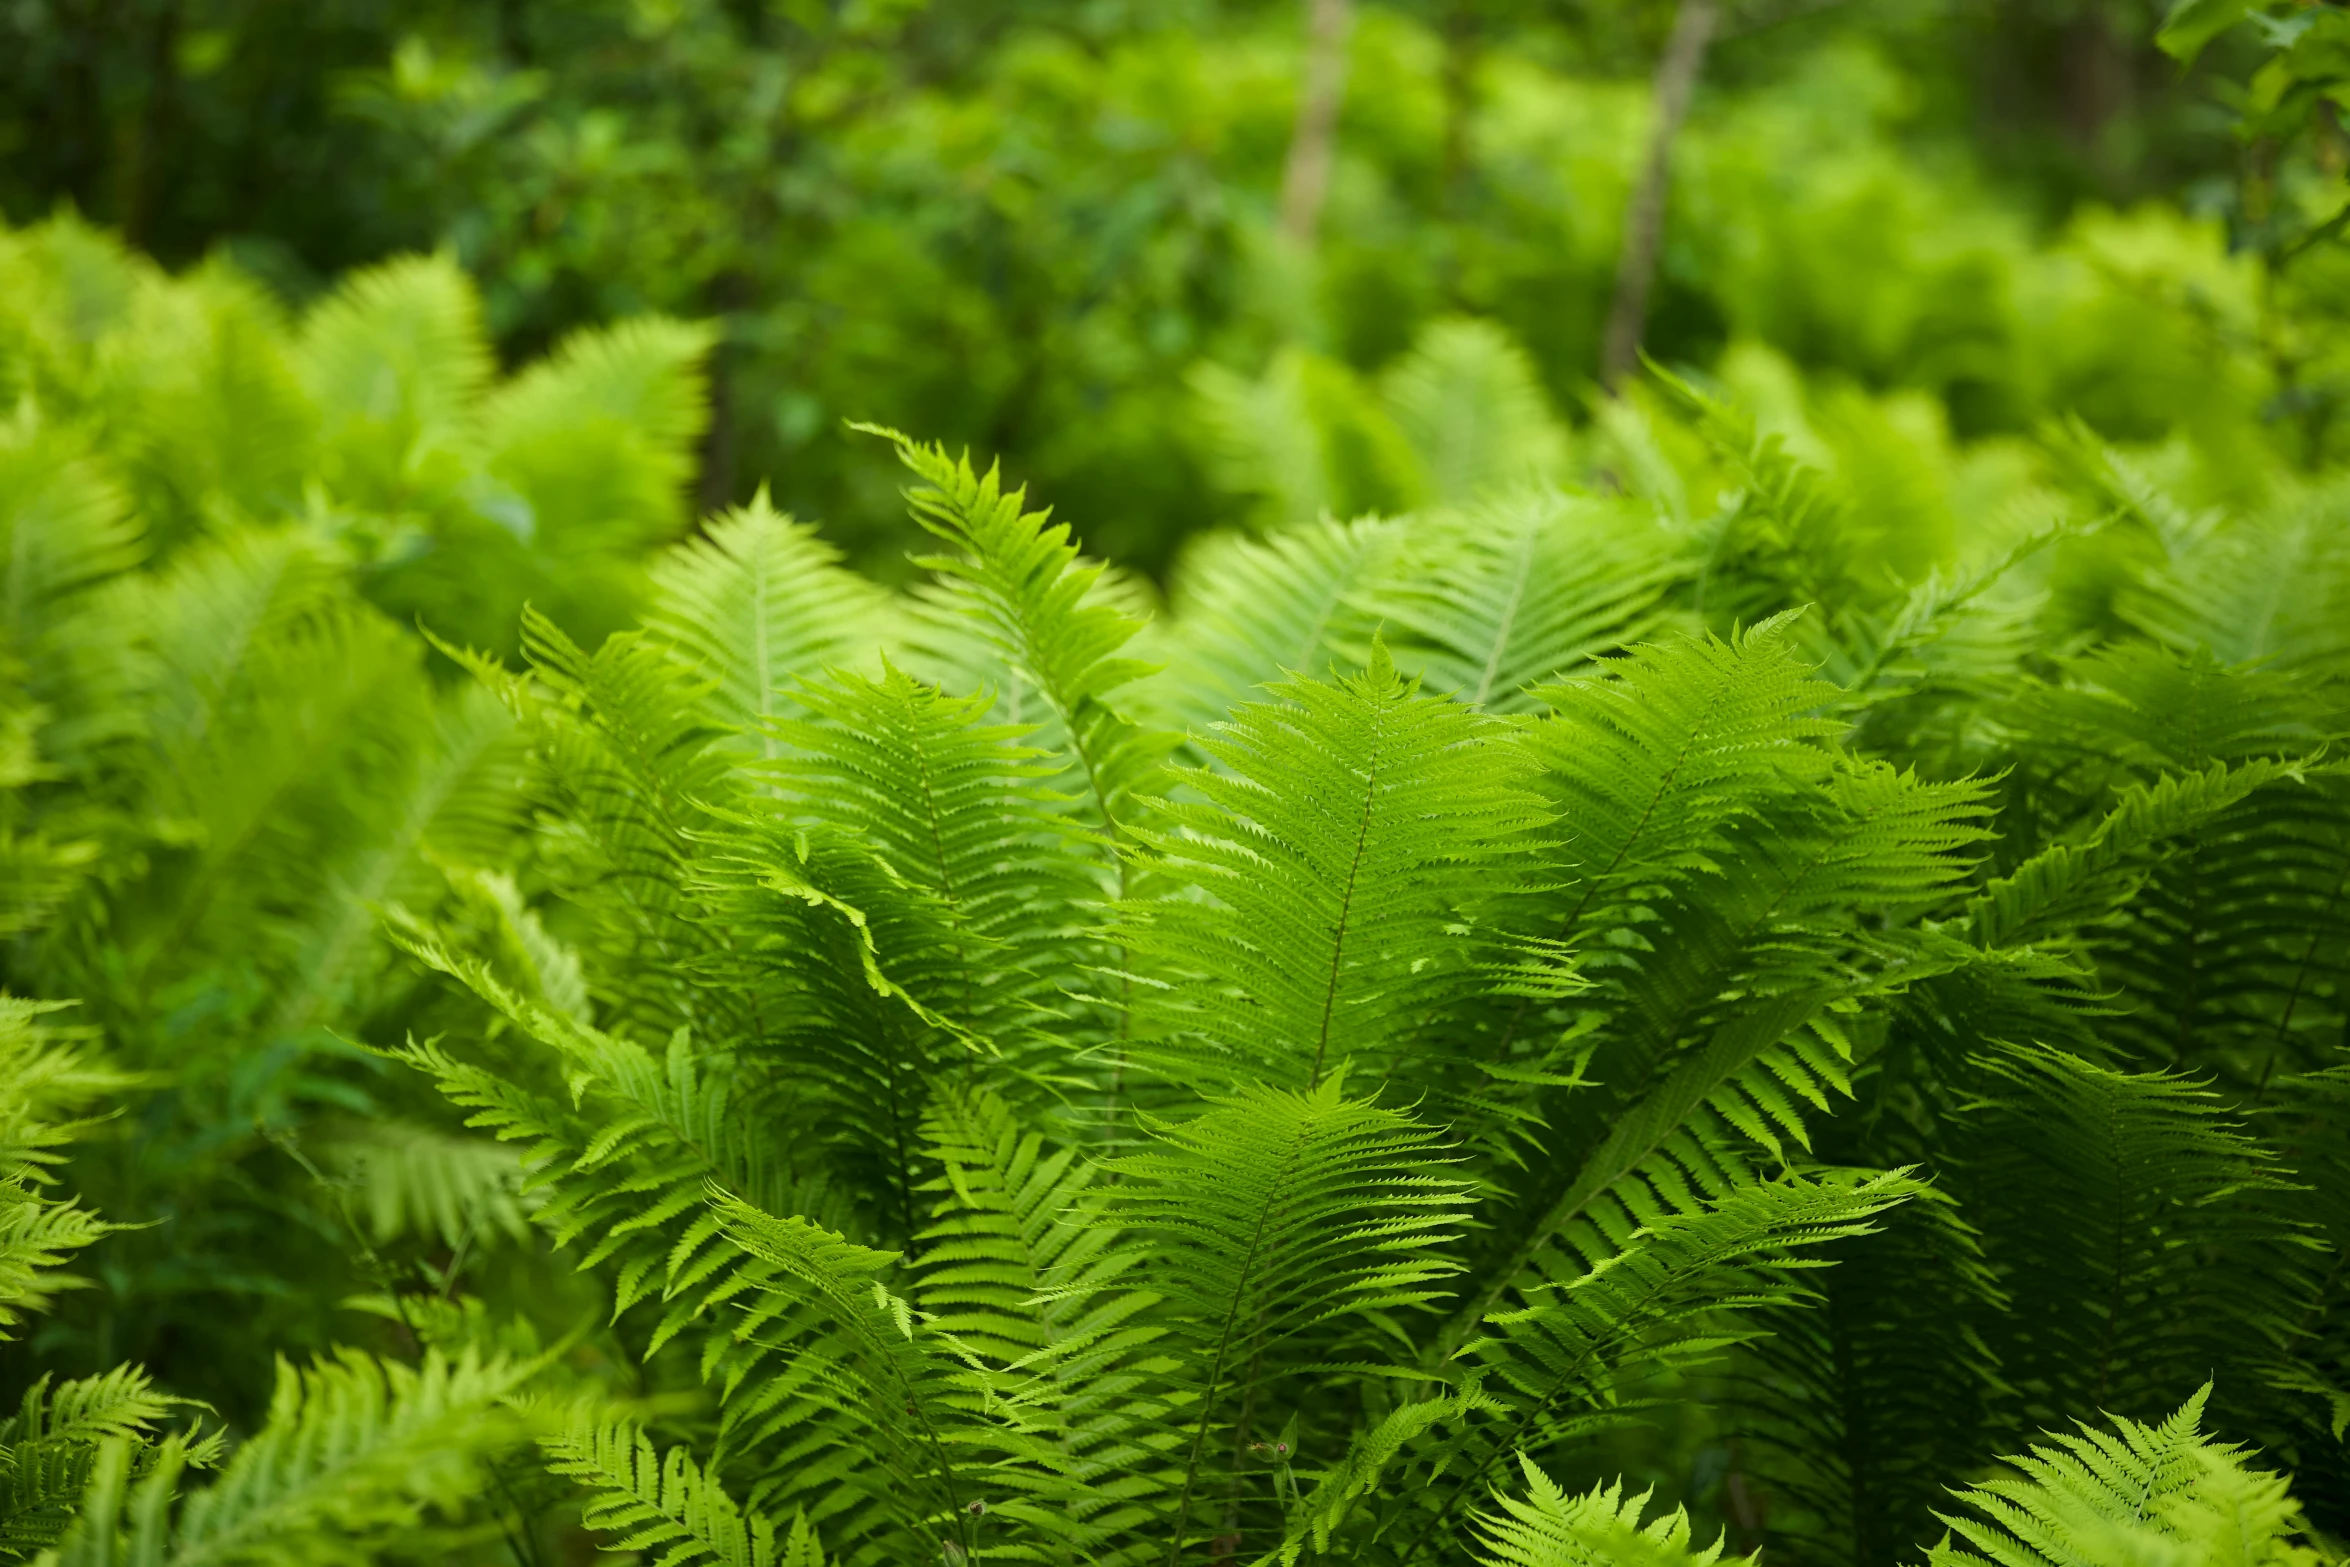 green ferns grow in the forest with many leaves